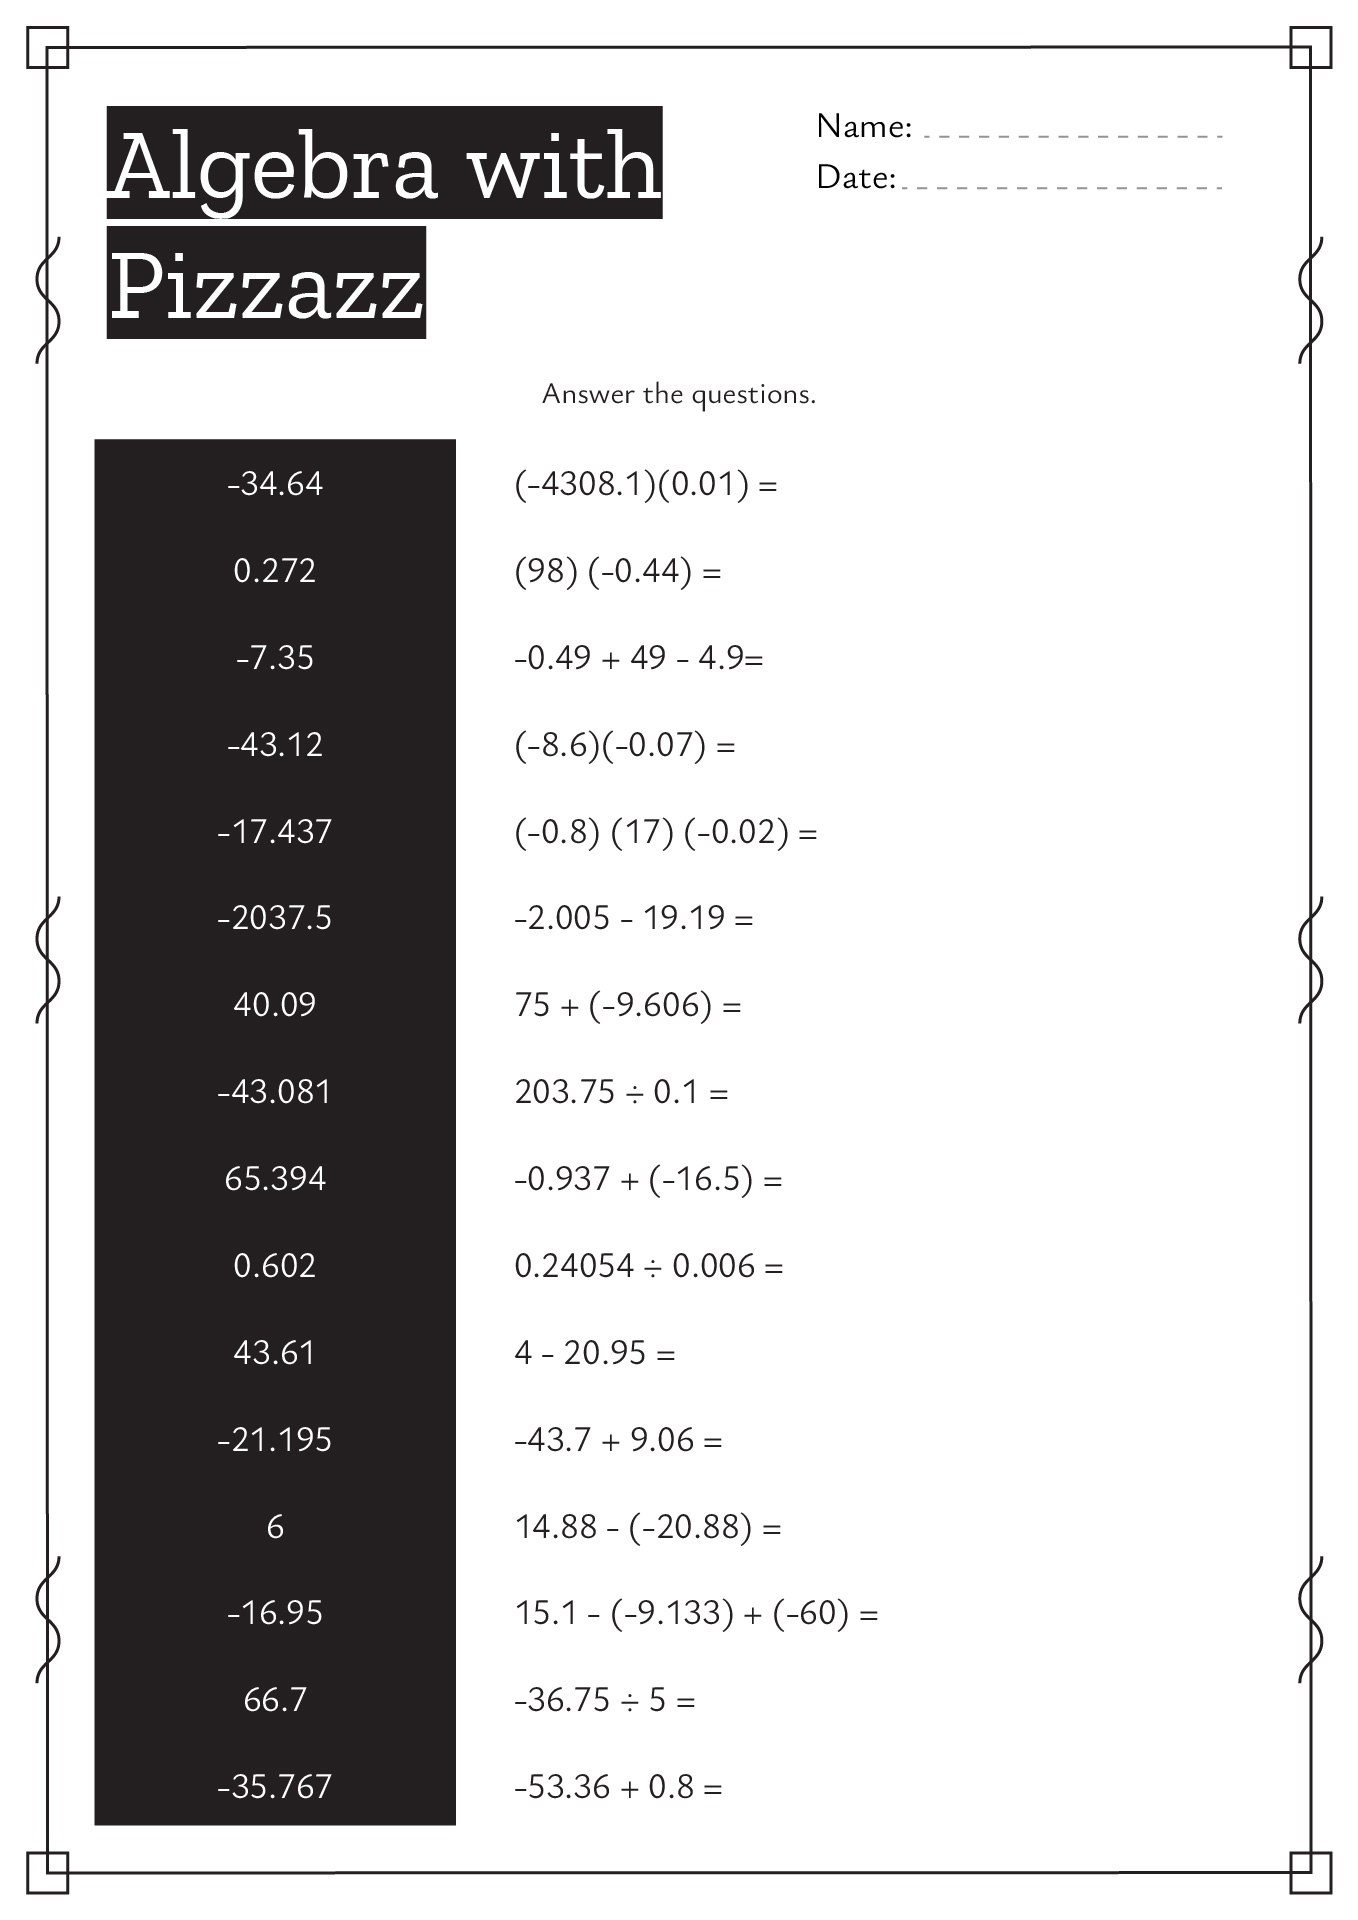 Algebra with Pizzazz Worksheets